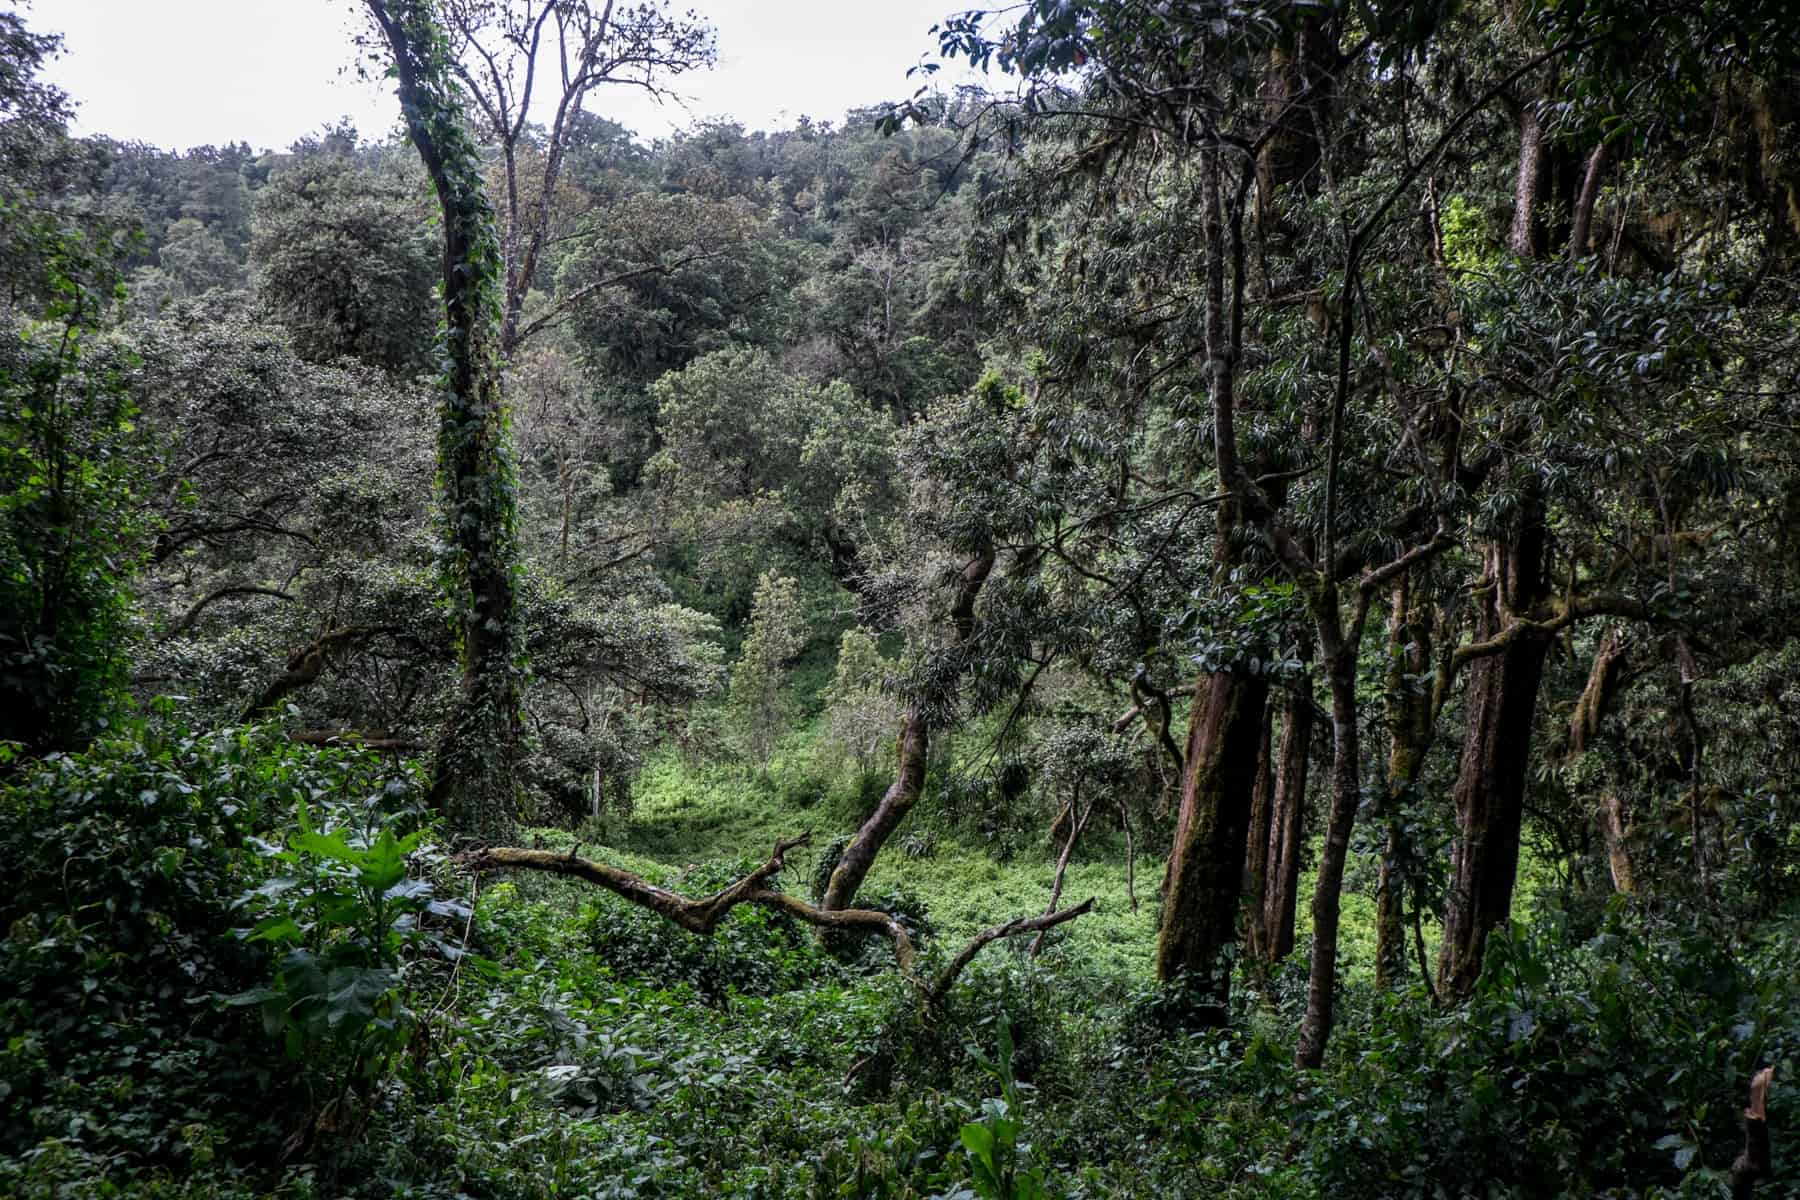 The densely packed trees and green vegetation of the Rainforest Zone when climbing Kilimanjaro 